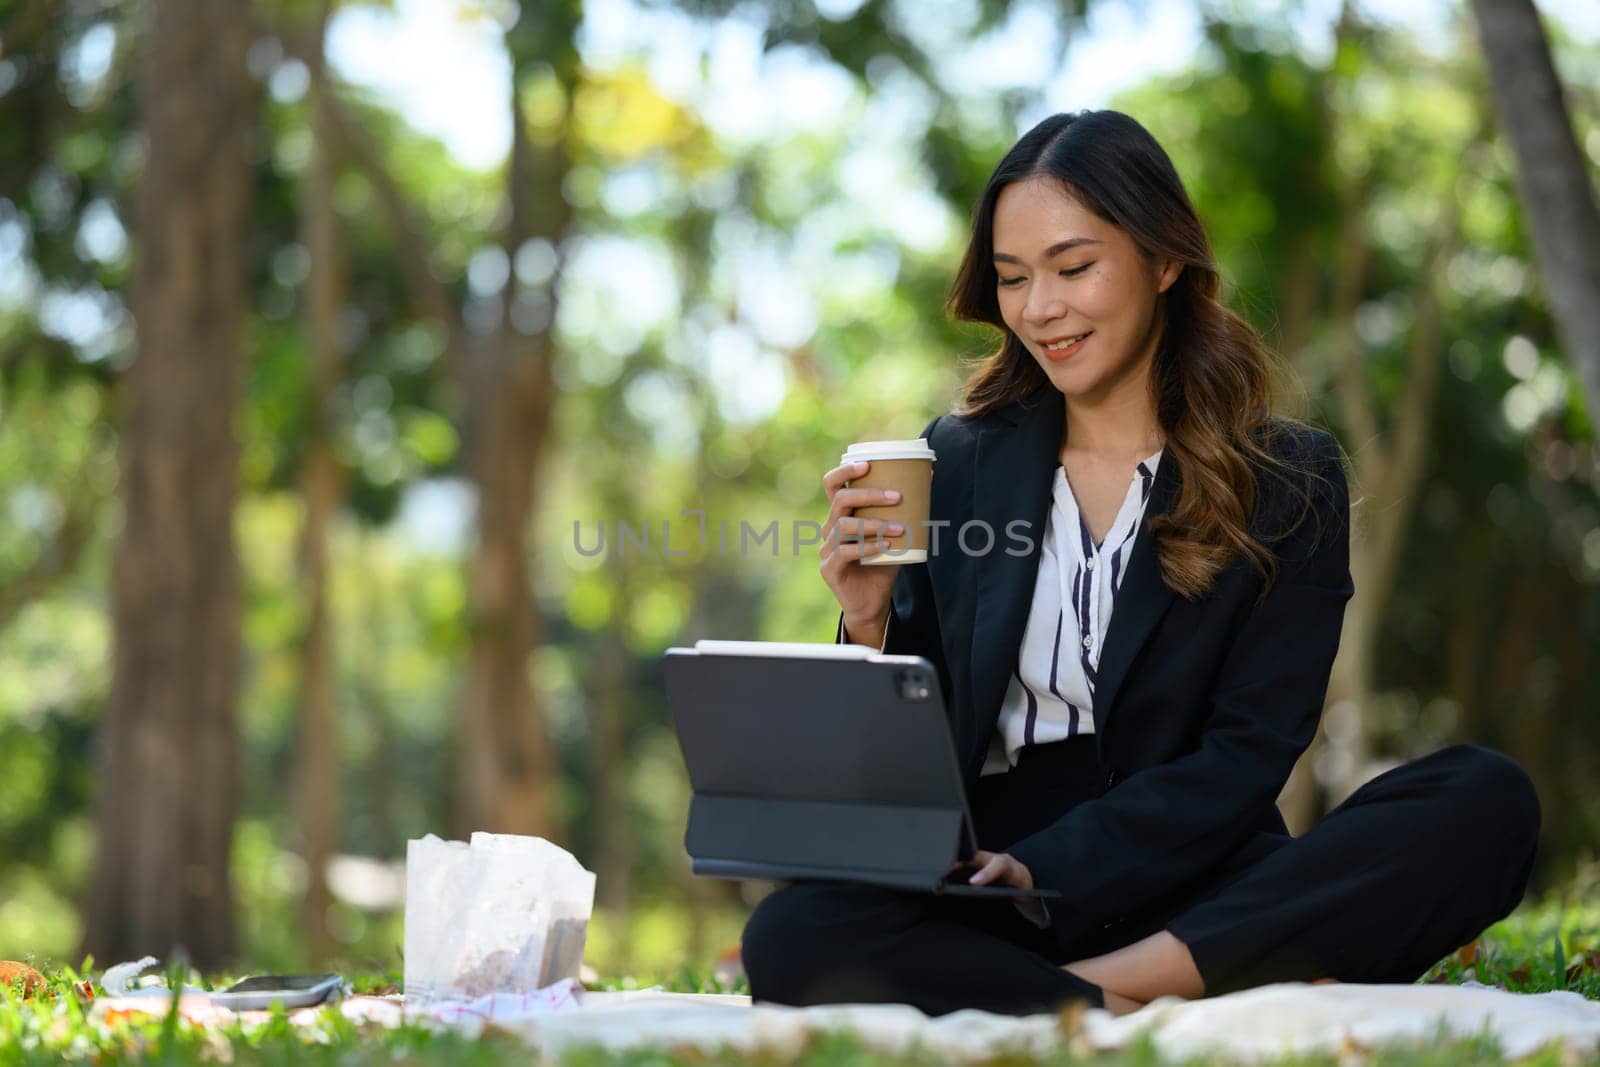 Millennial businesswoman working remotely outside office drinking coffee and using digital tablet.